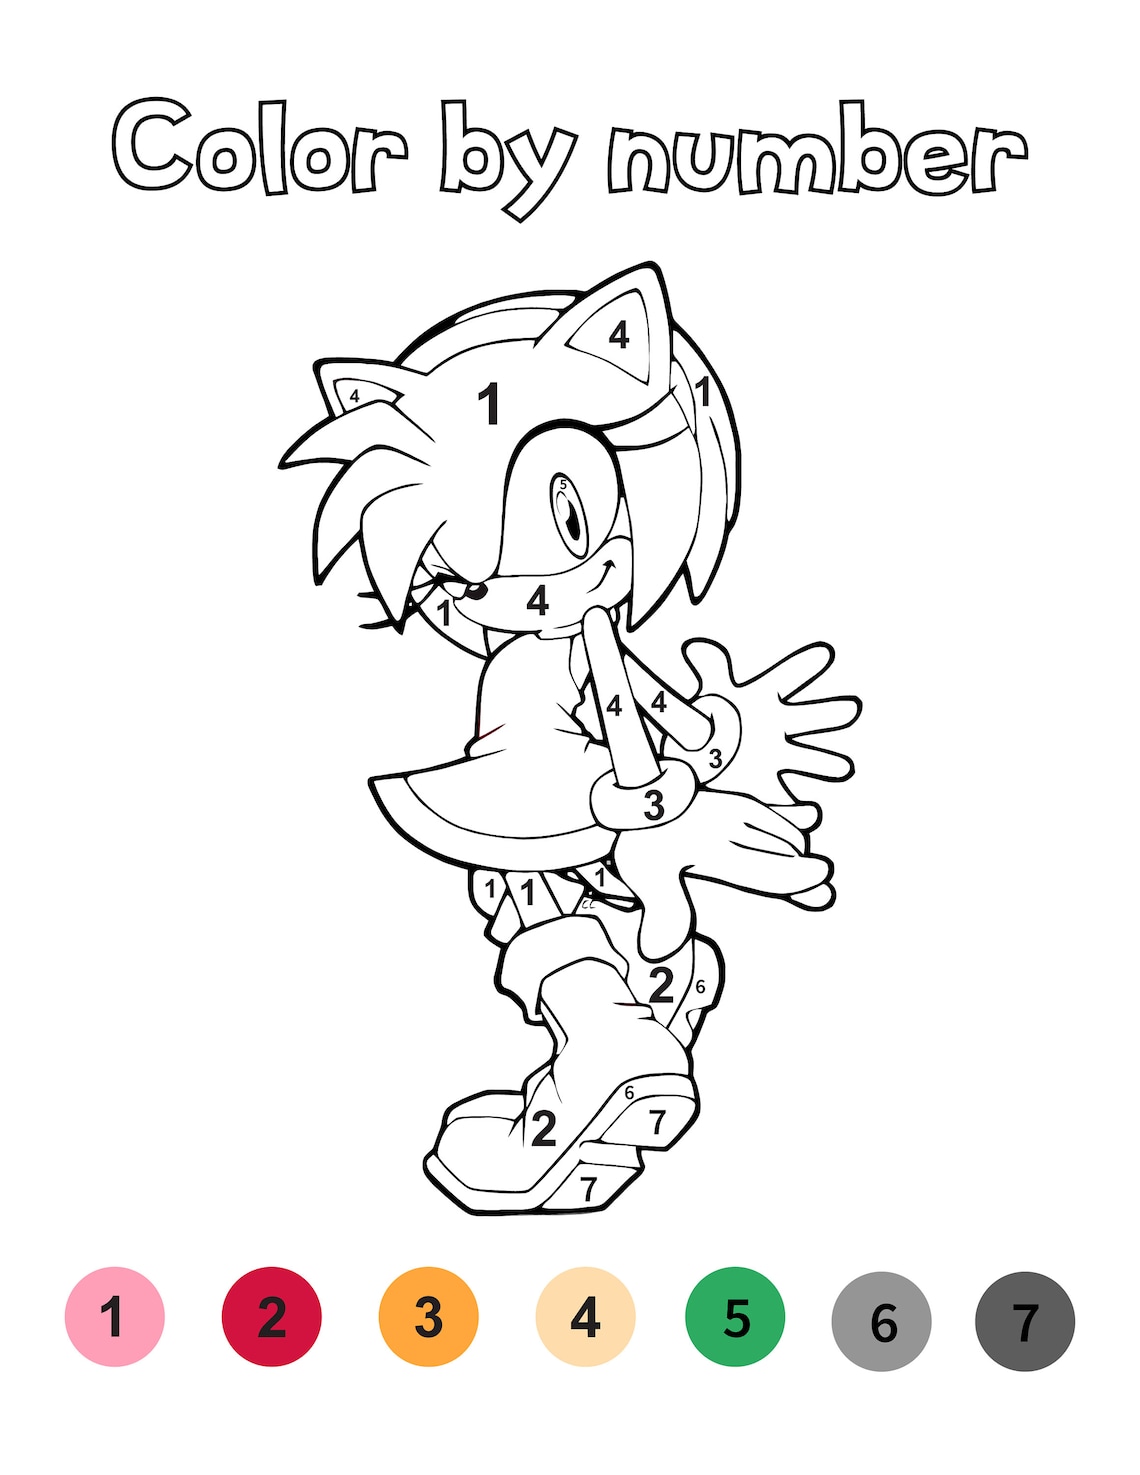 sonic-coloring-by-numbers-coloring-pages-gambaran